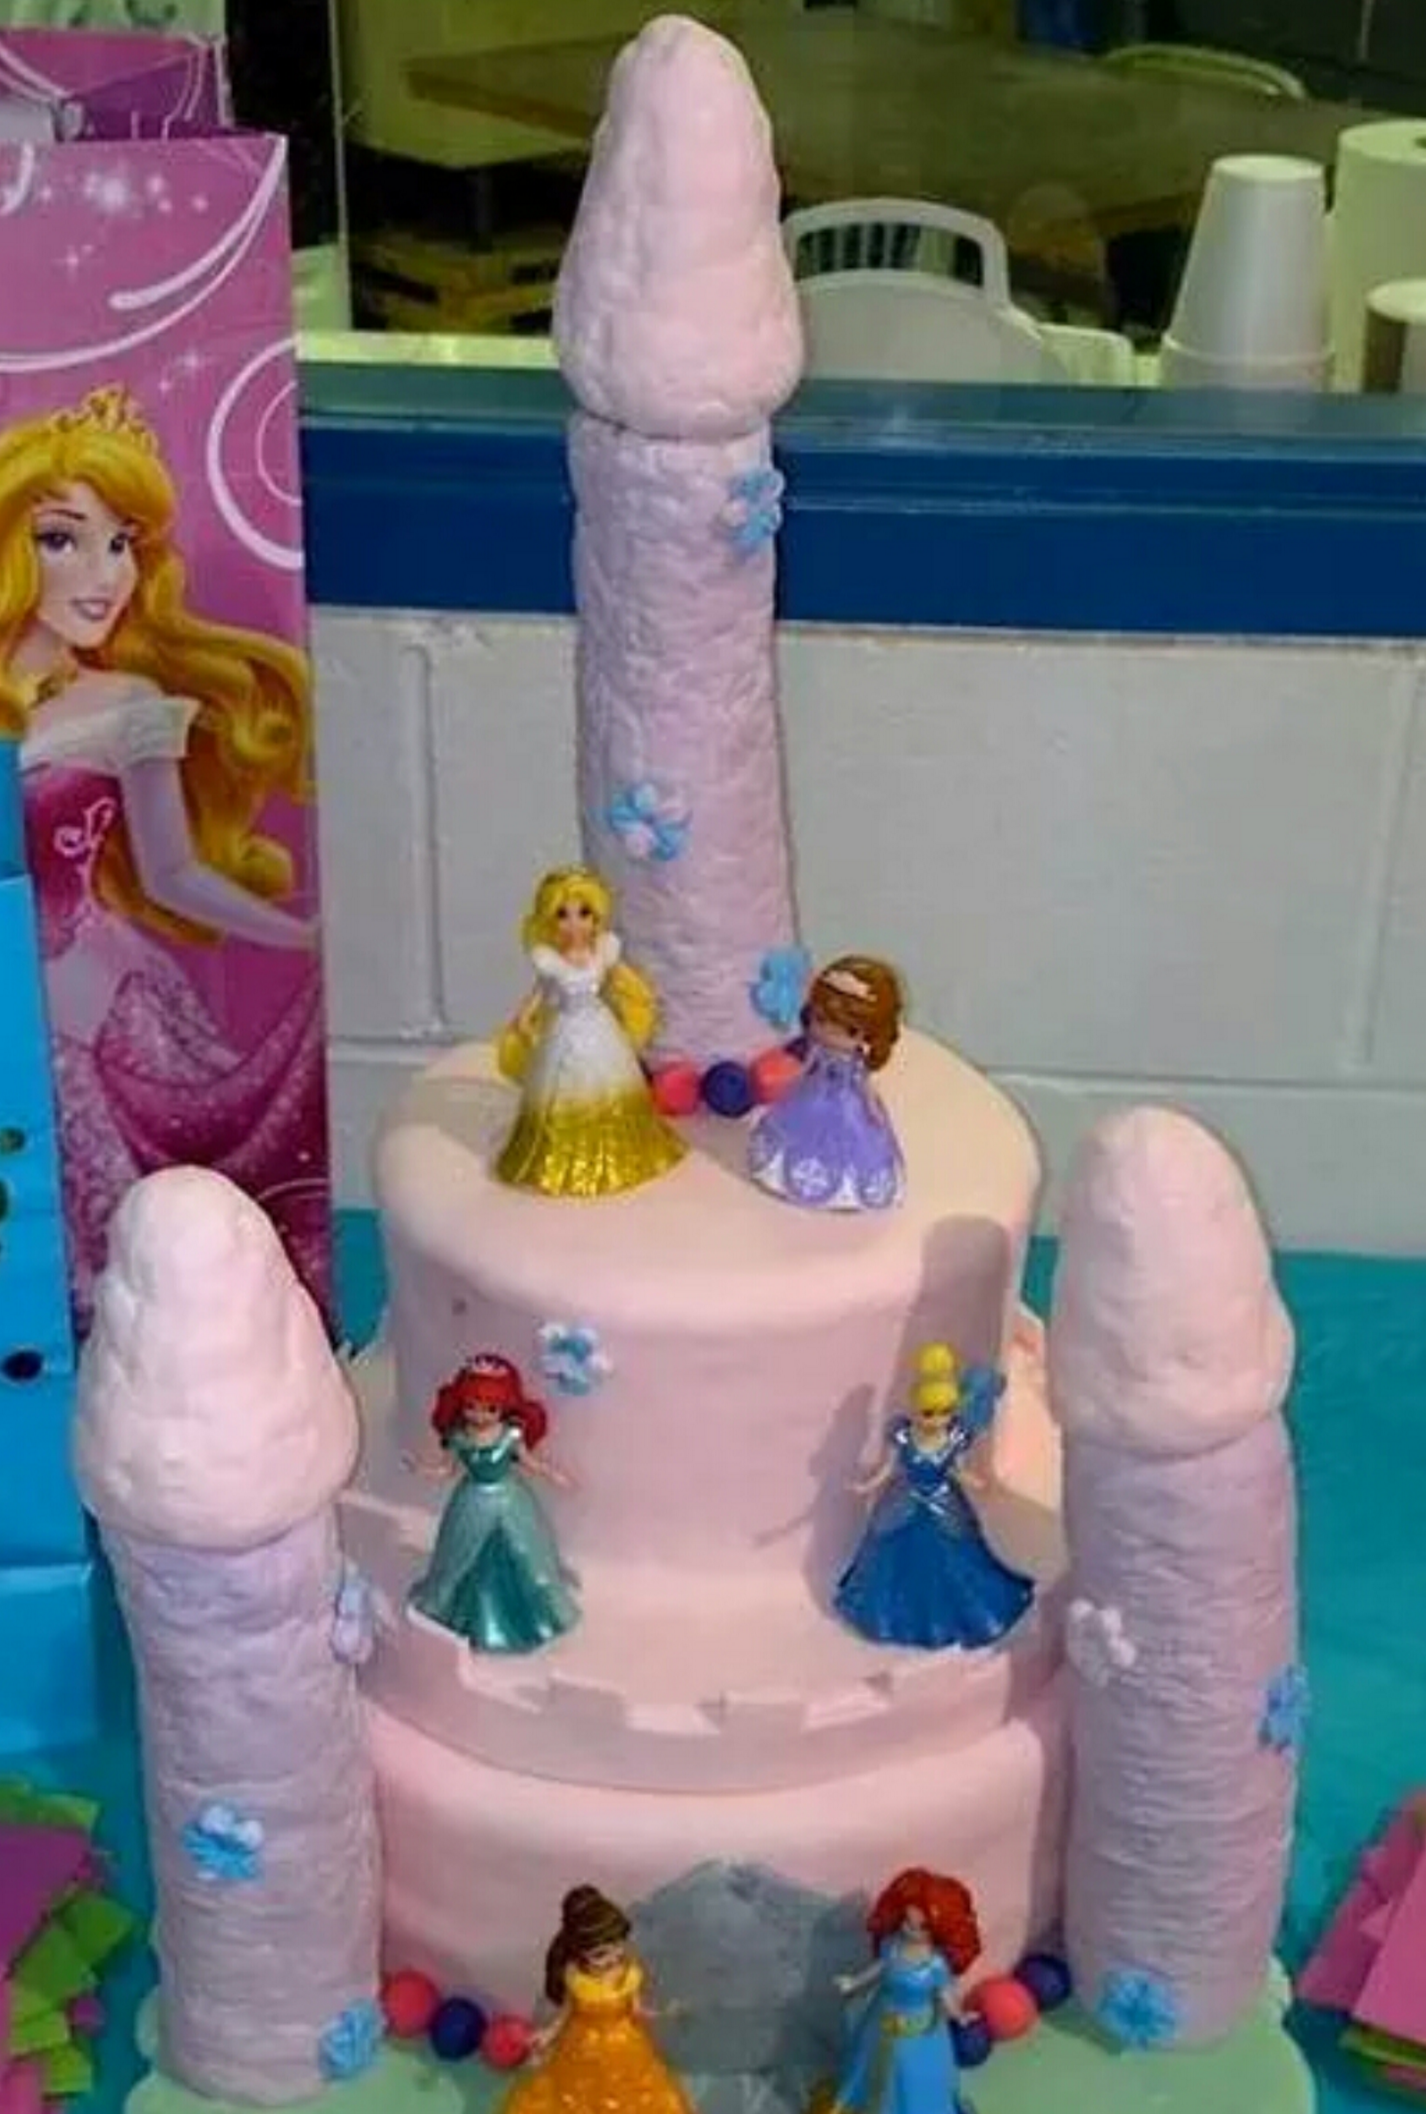 penis castle cake with princesses